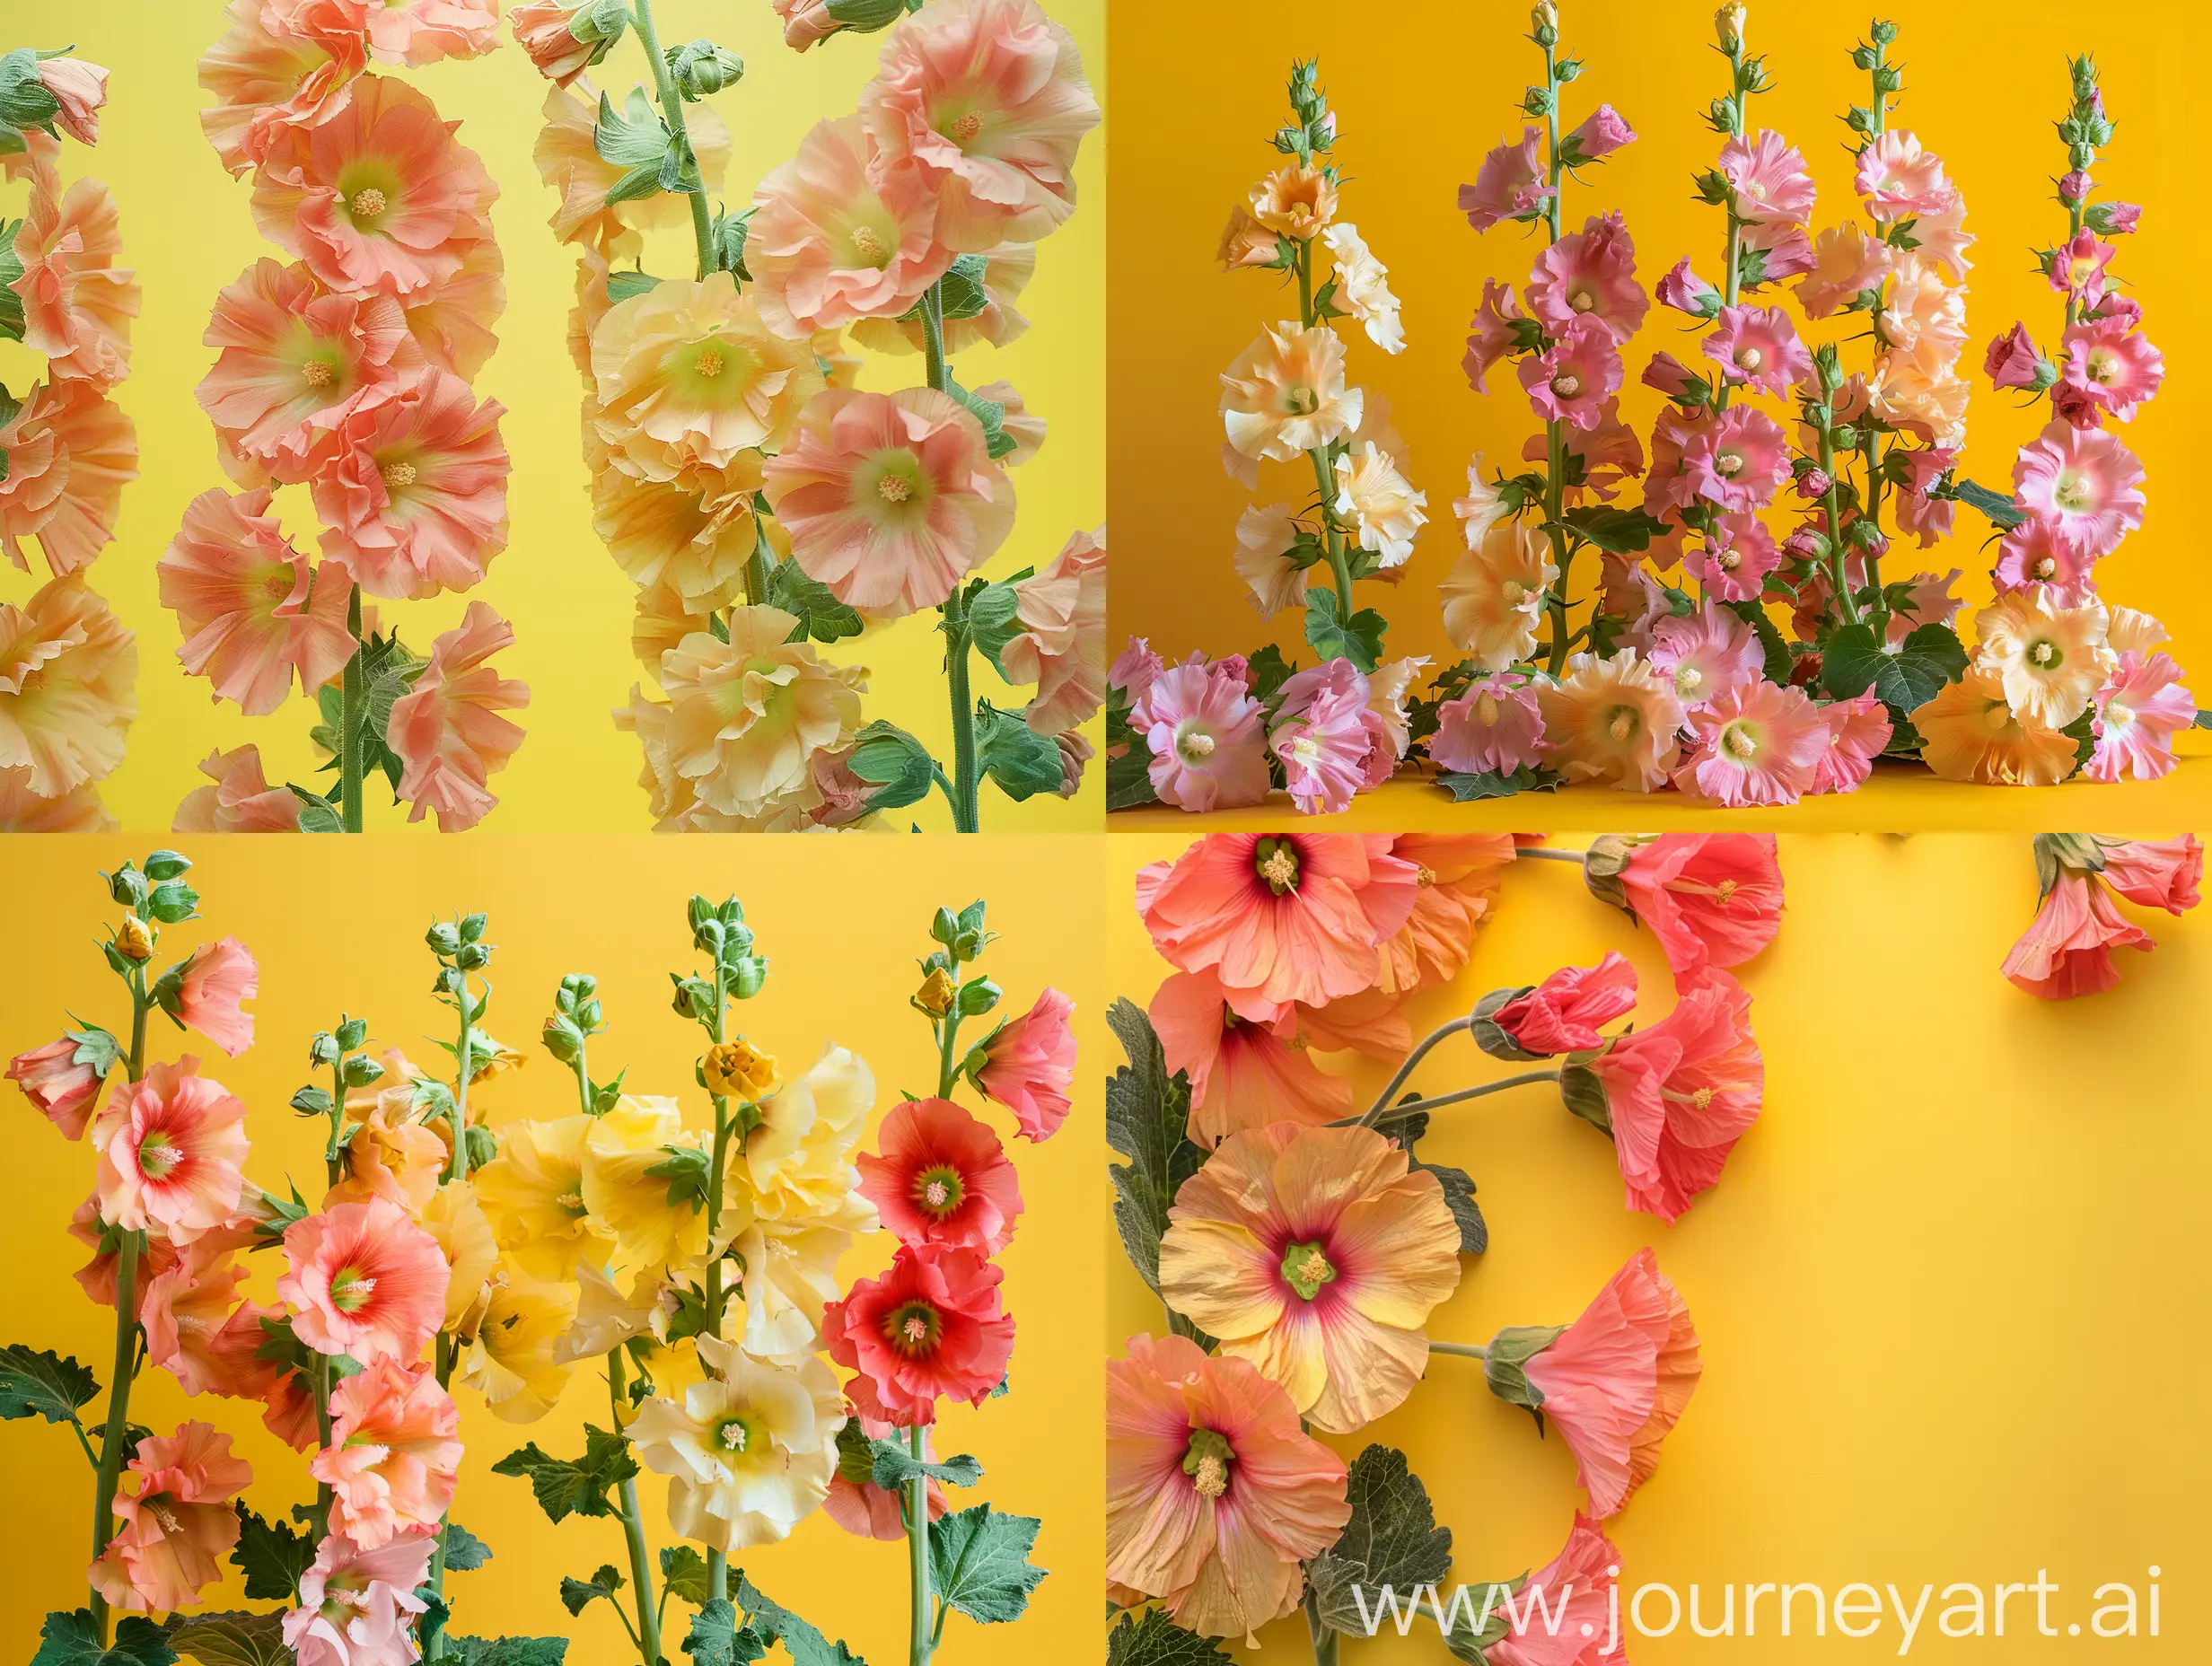 Studio shot with a rich yellow background of Hollyhocks